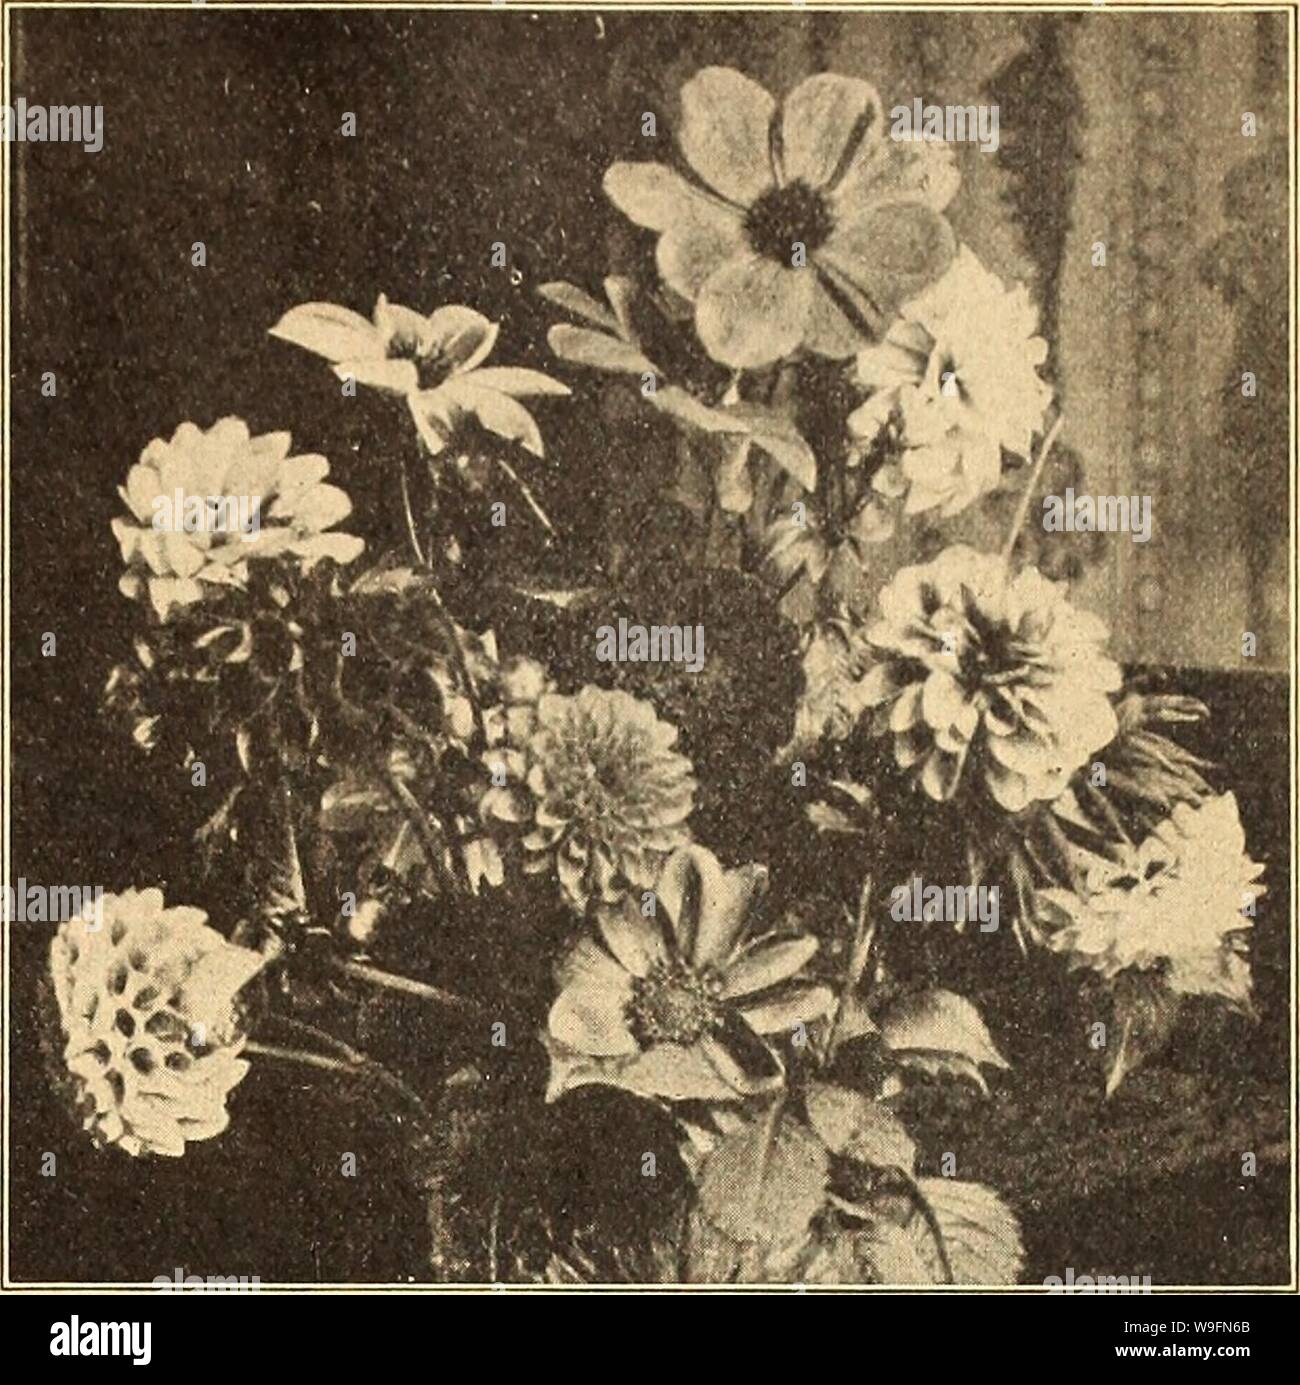 Archive image from page 56 of Currie's farm and garden annual. Currie's farm and garden annual : spring 1925 50th year  curriesfarmgarde19curr 8 Year: 1925 ( LIST OF CHOICE GARDEN SEEDS FOR 1925. 51 DAHLIA Bloom from Seed the First Season. For fine massing effects sow Unhlia Seed inside in March or April, transplanting to small pots and planting out when safe, setting a foot apart. Save roots of the most promising sorts. Dahlia. Coltiiess Hybrids—This splendid new class of single Dahlias, originated from the popular Dahlia, Coltness Gem. The plants are of neat compact habit, averaging about IS Stock Photo